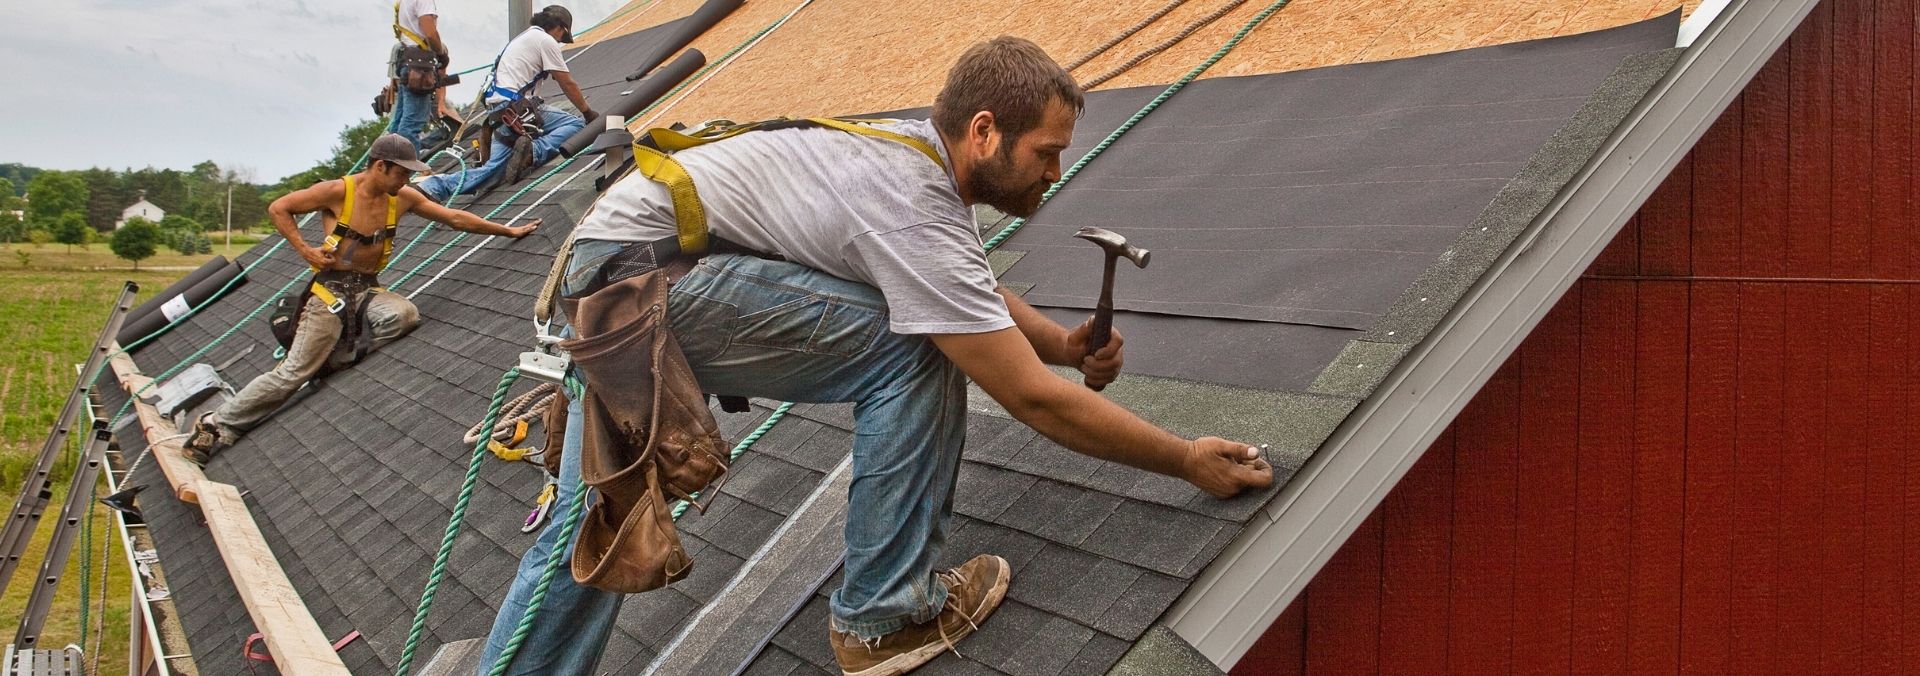 Roofing Warranties: What You Need to Know